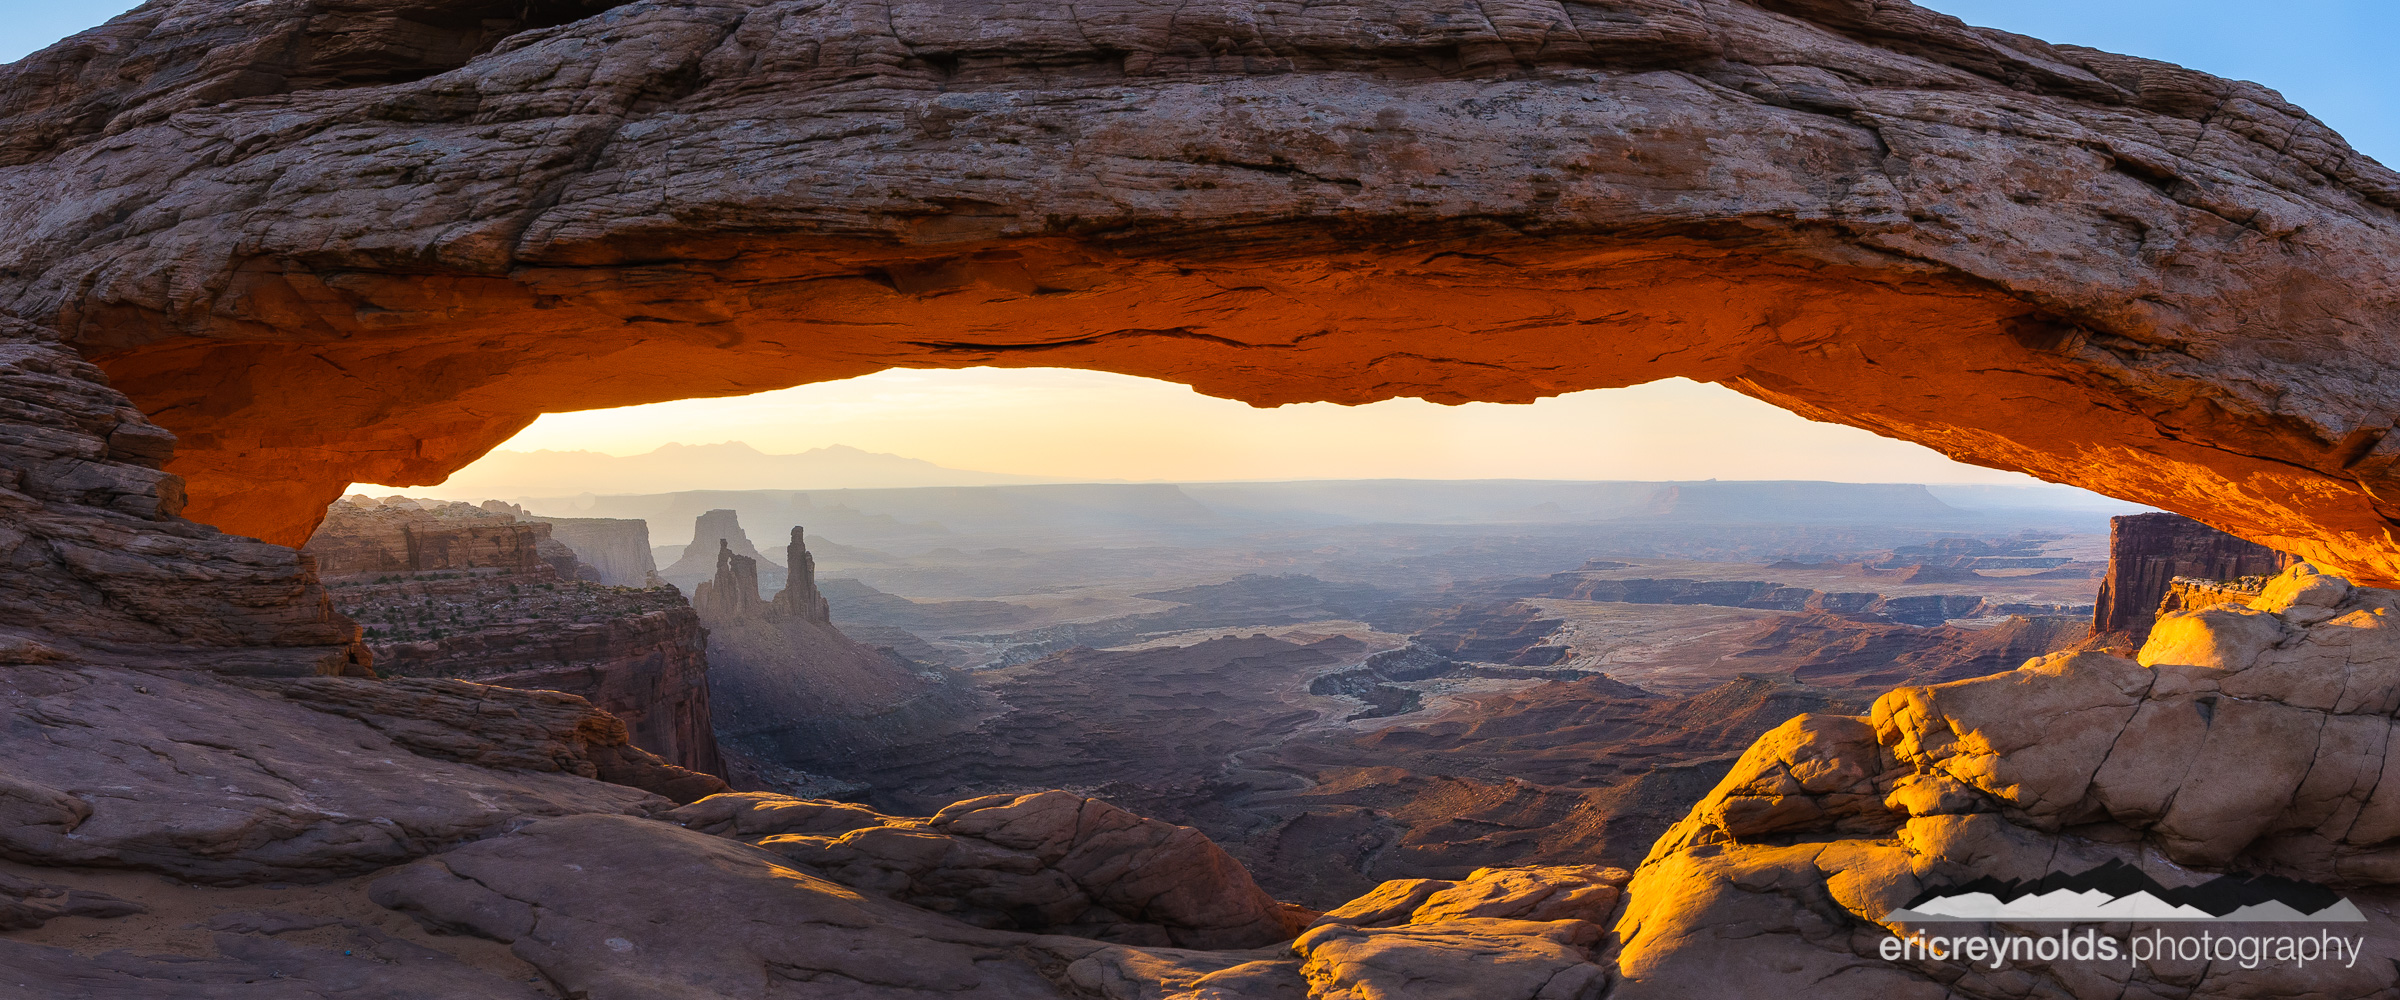 Sunrise at Mesa Arch by Eric Reynolds - Landscape Photographer